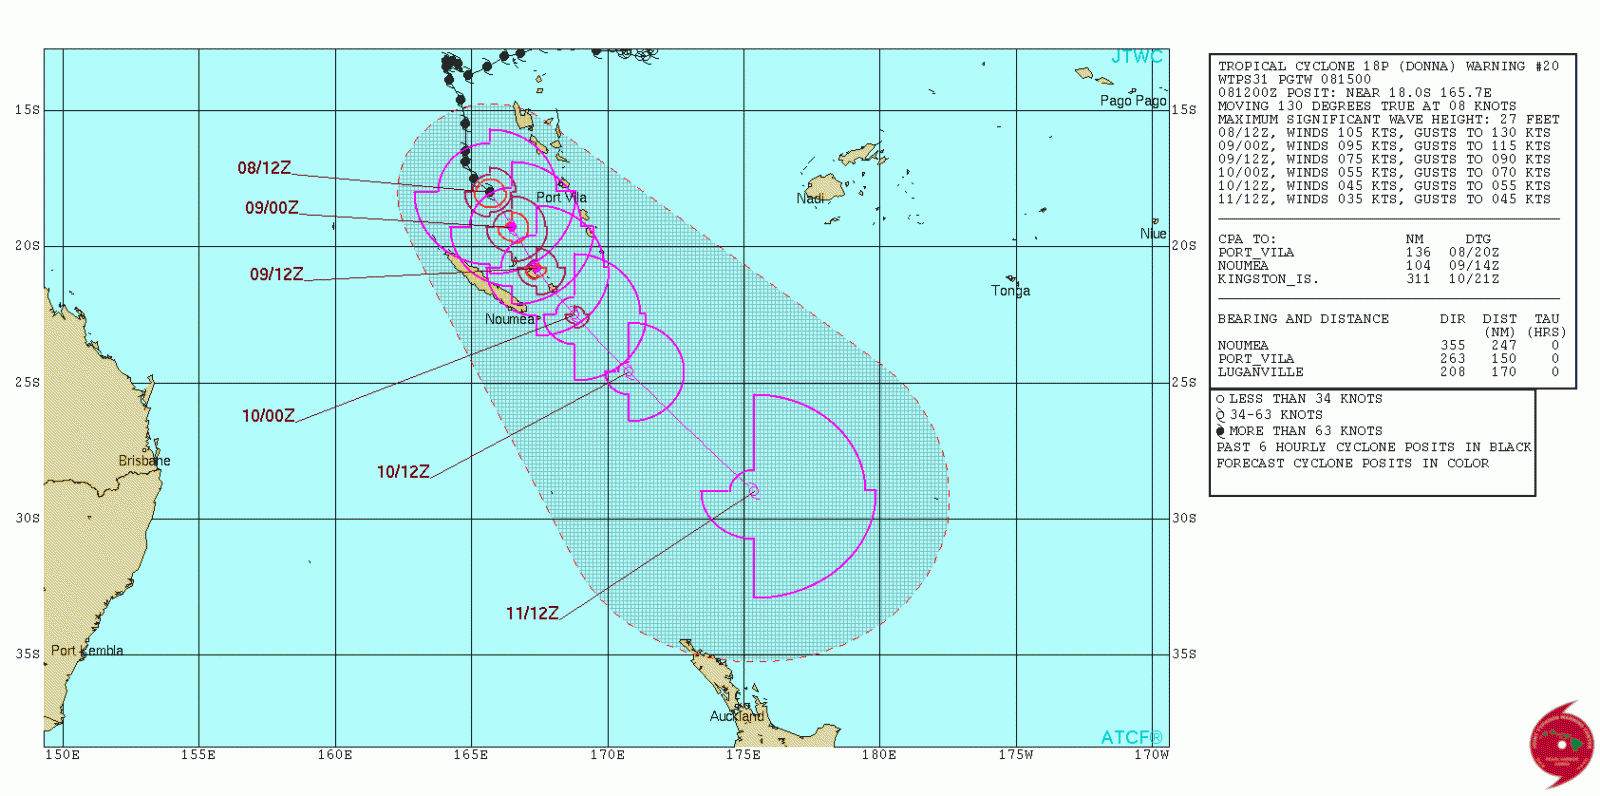 Tropical Cyclone Donna forecast track by JTWC on 15:00 UTC on May 8, 2017